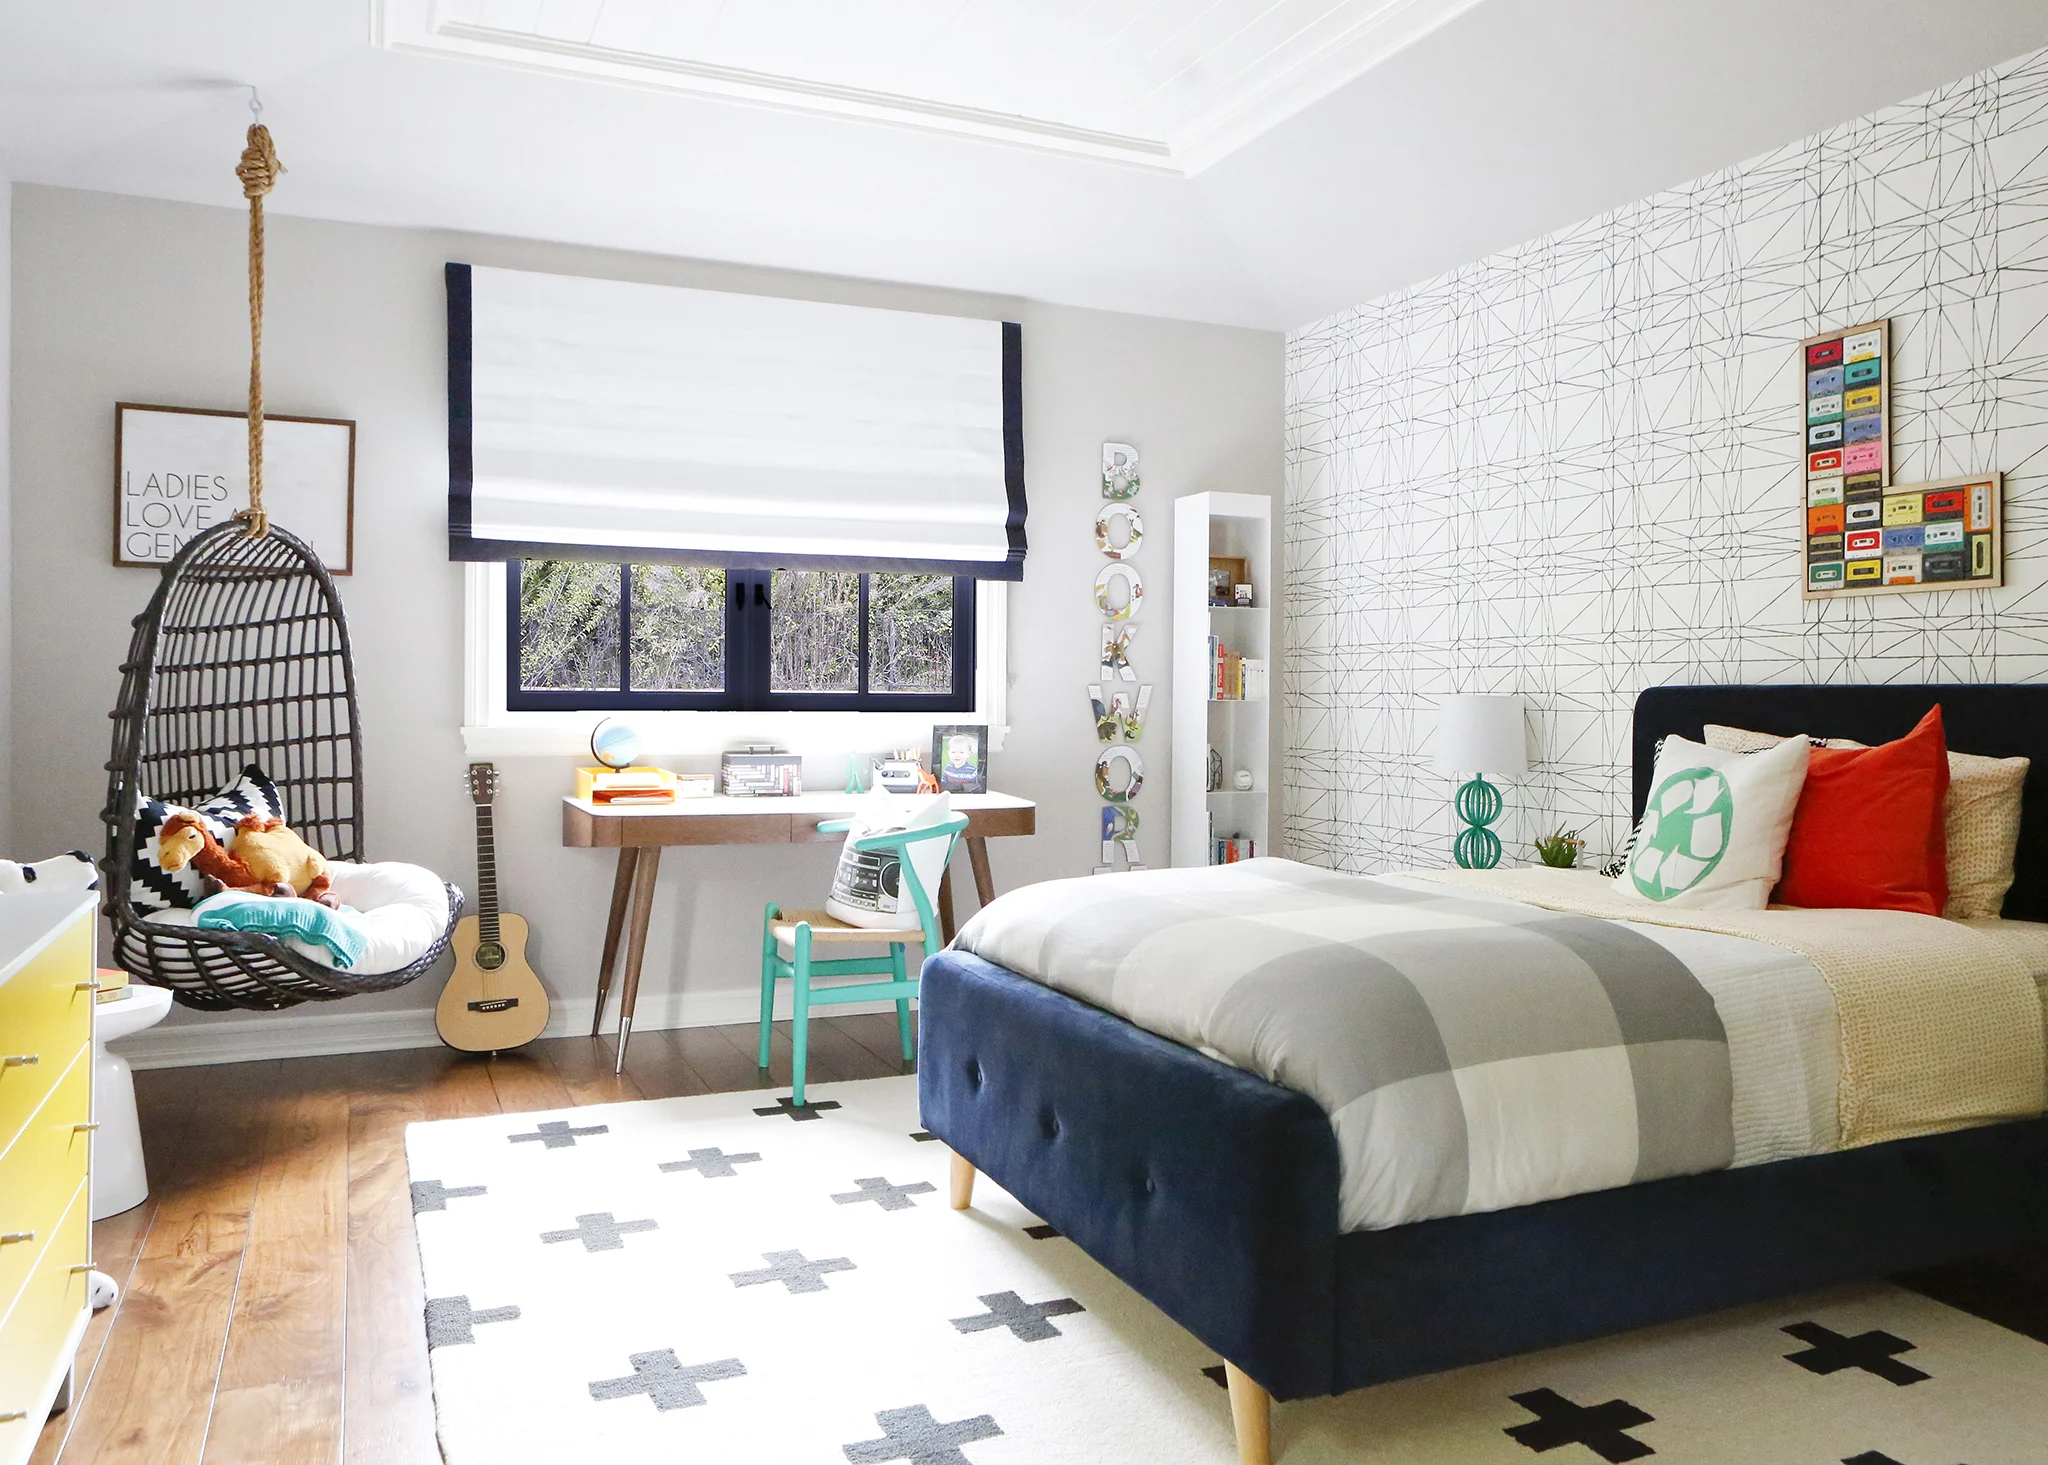 Modern Eclectic Big Boy Room with Whimsical Accent Decor